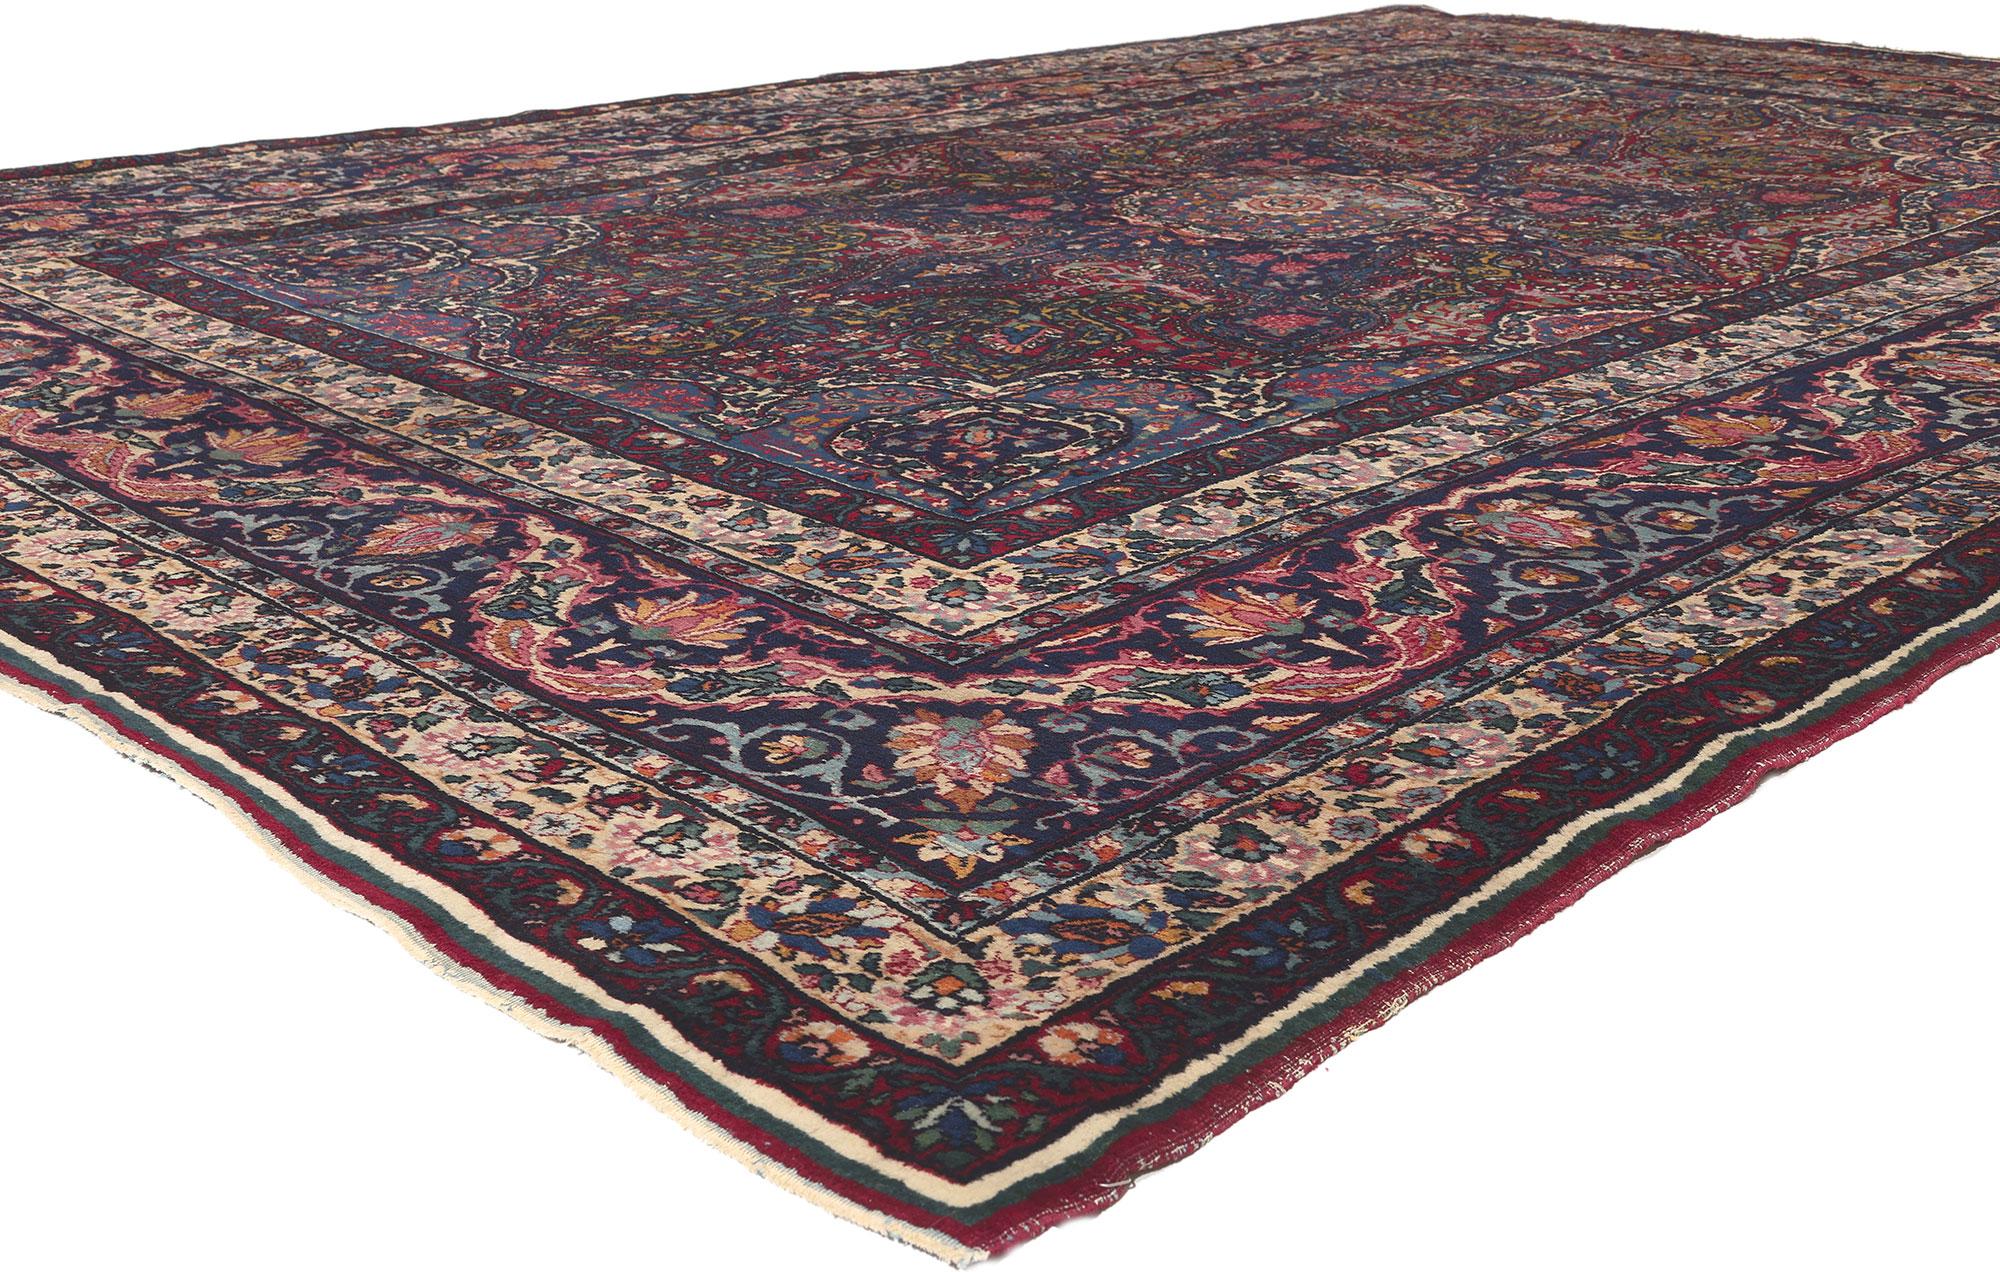 78643 Antique Persian Yazd Rug, 08'10 x 13'00.
Traditional sensibility collides with nostalgic charm in this antique Persian Yazd rug. The highly decorative design and traditional color palette woven into this piece work together creating a look of